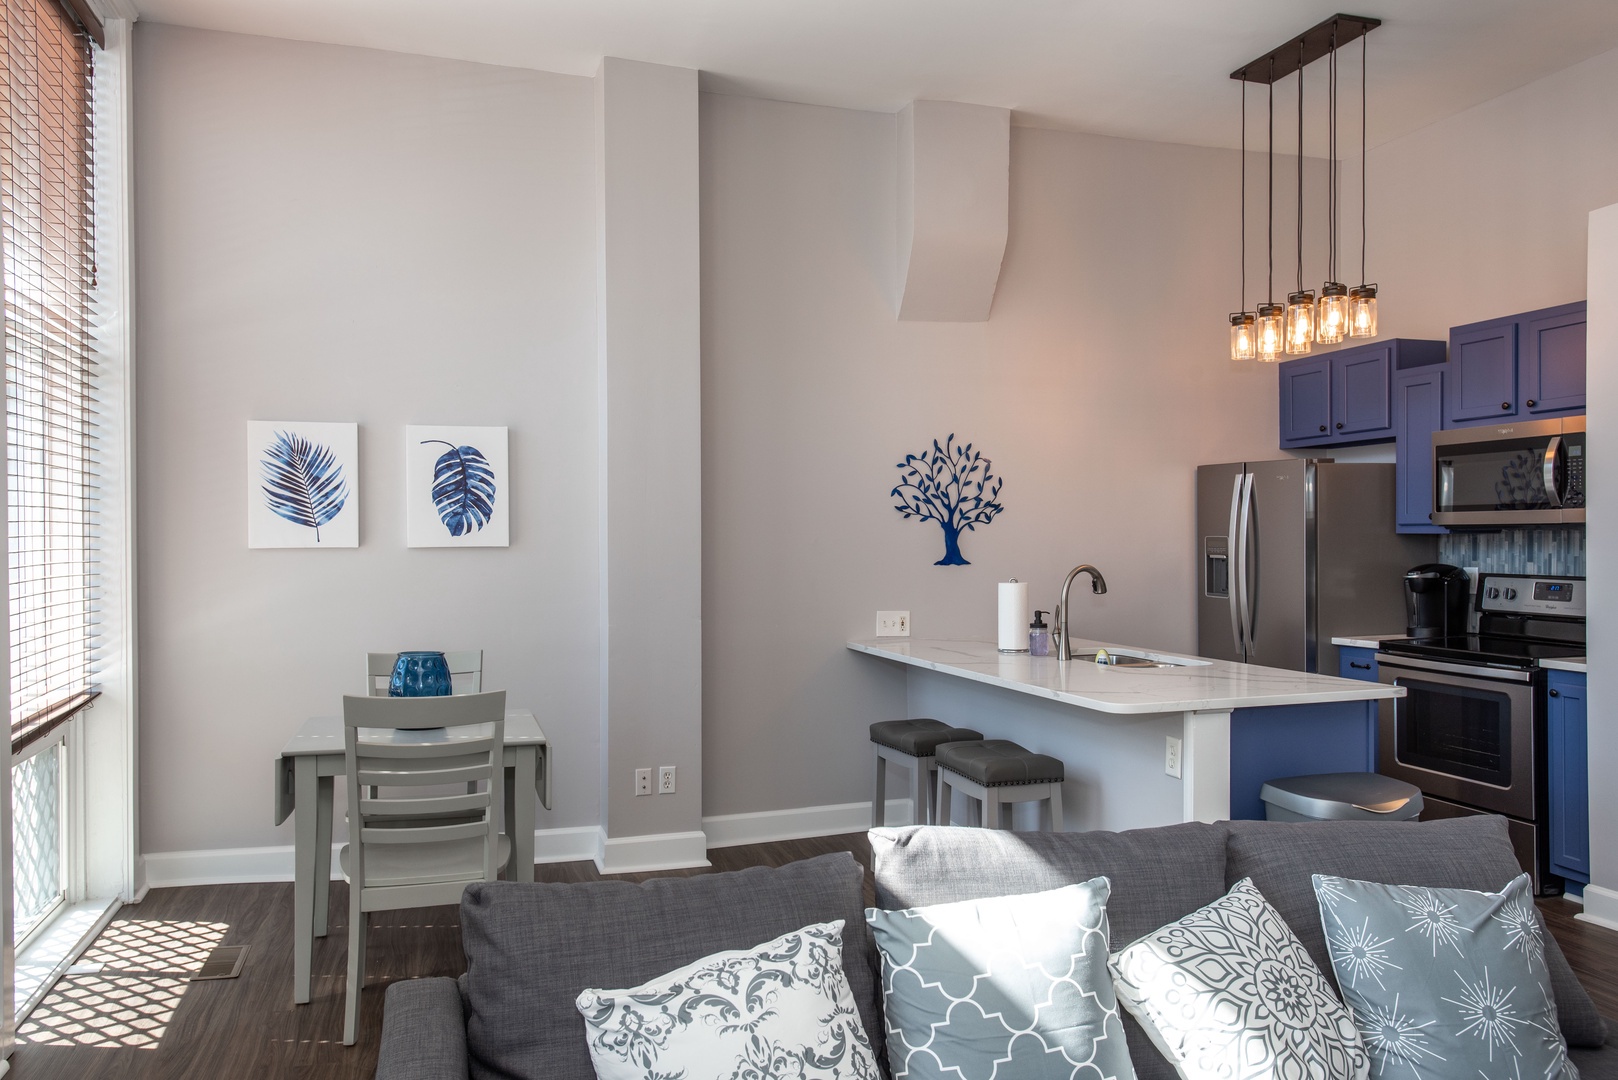 Apt 1 – Enjoy the open, breezy layout of the main living/dining/kitchen space